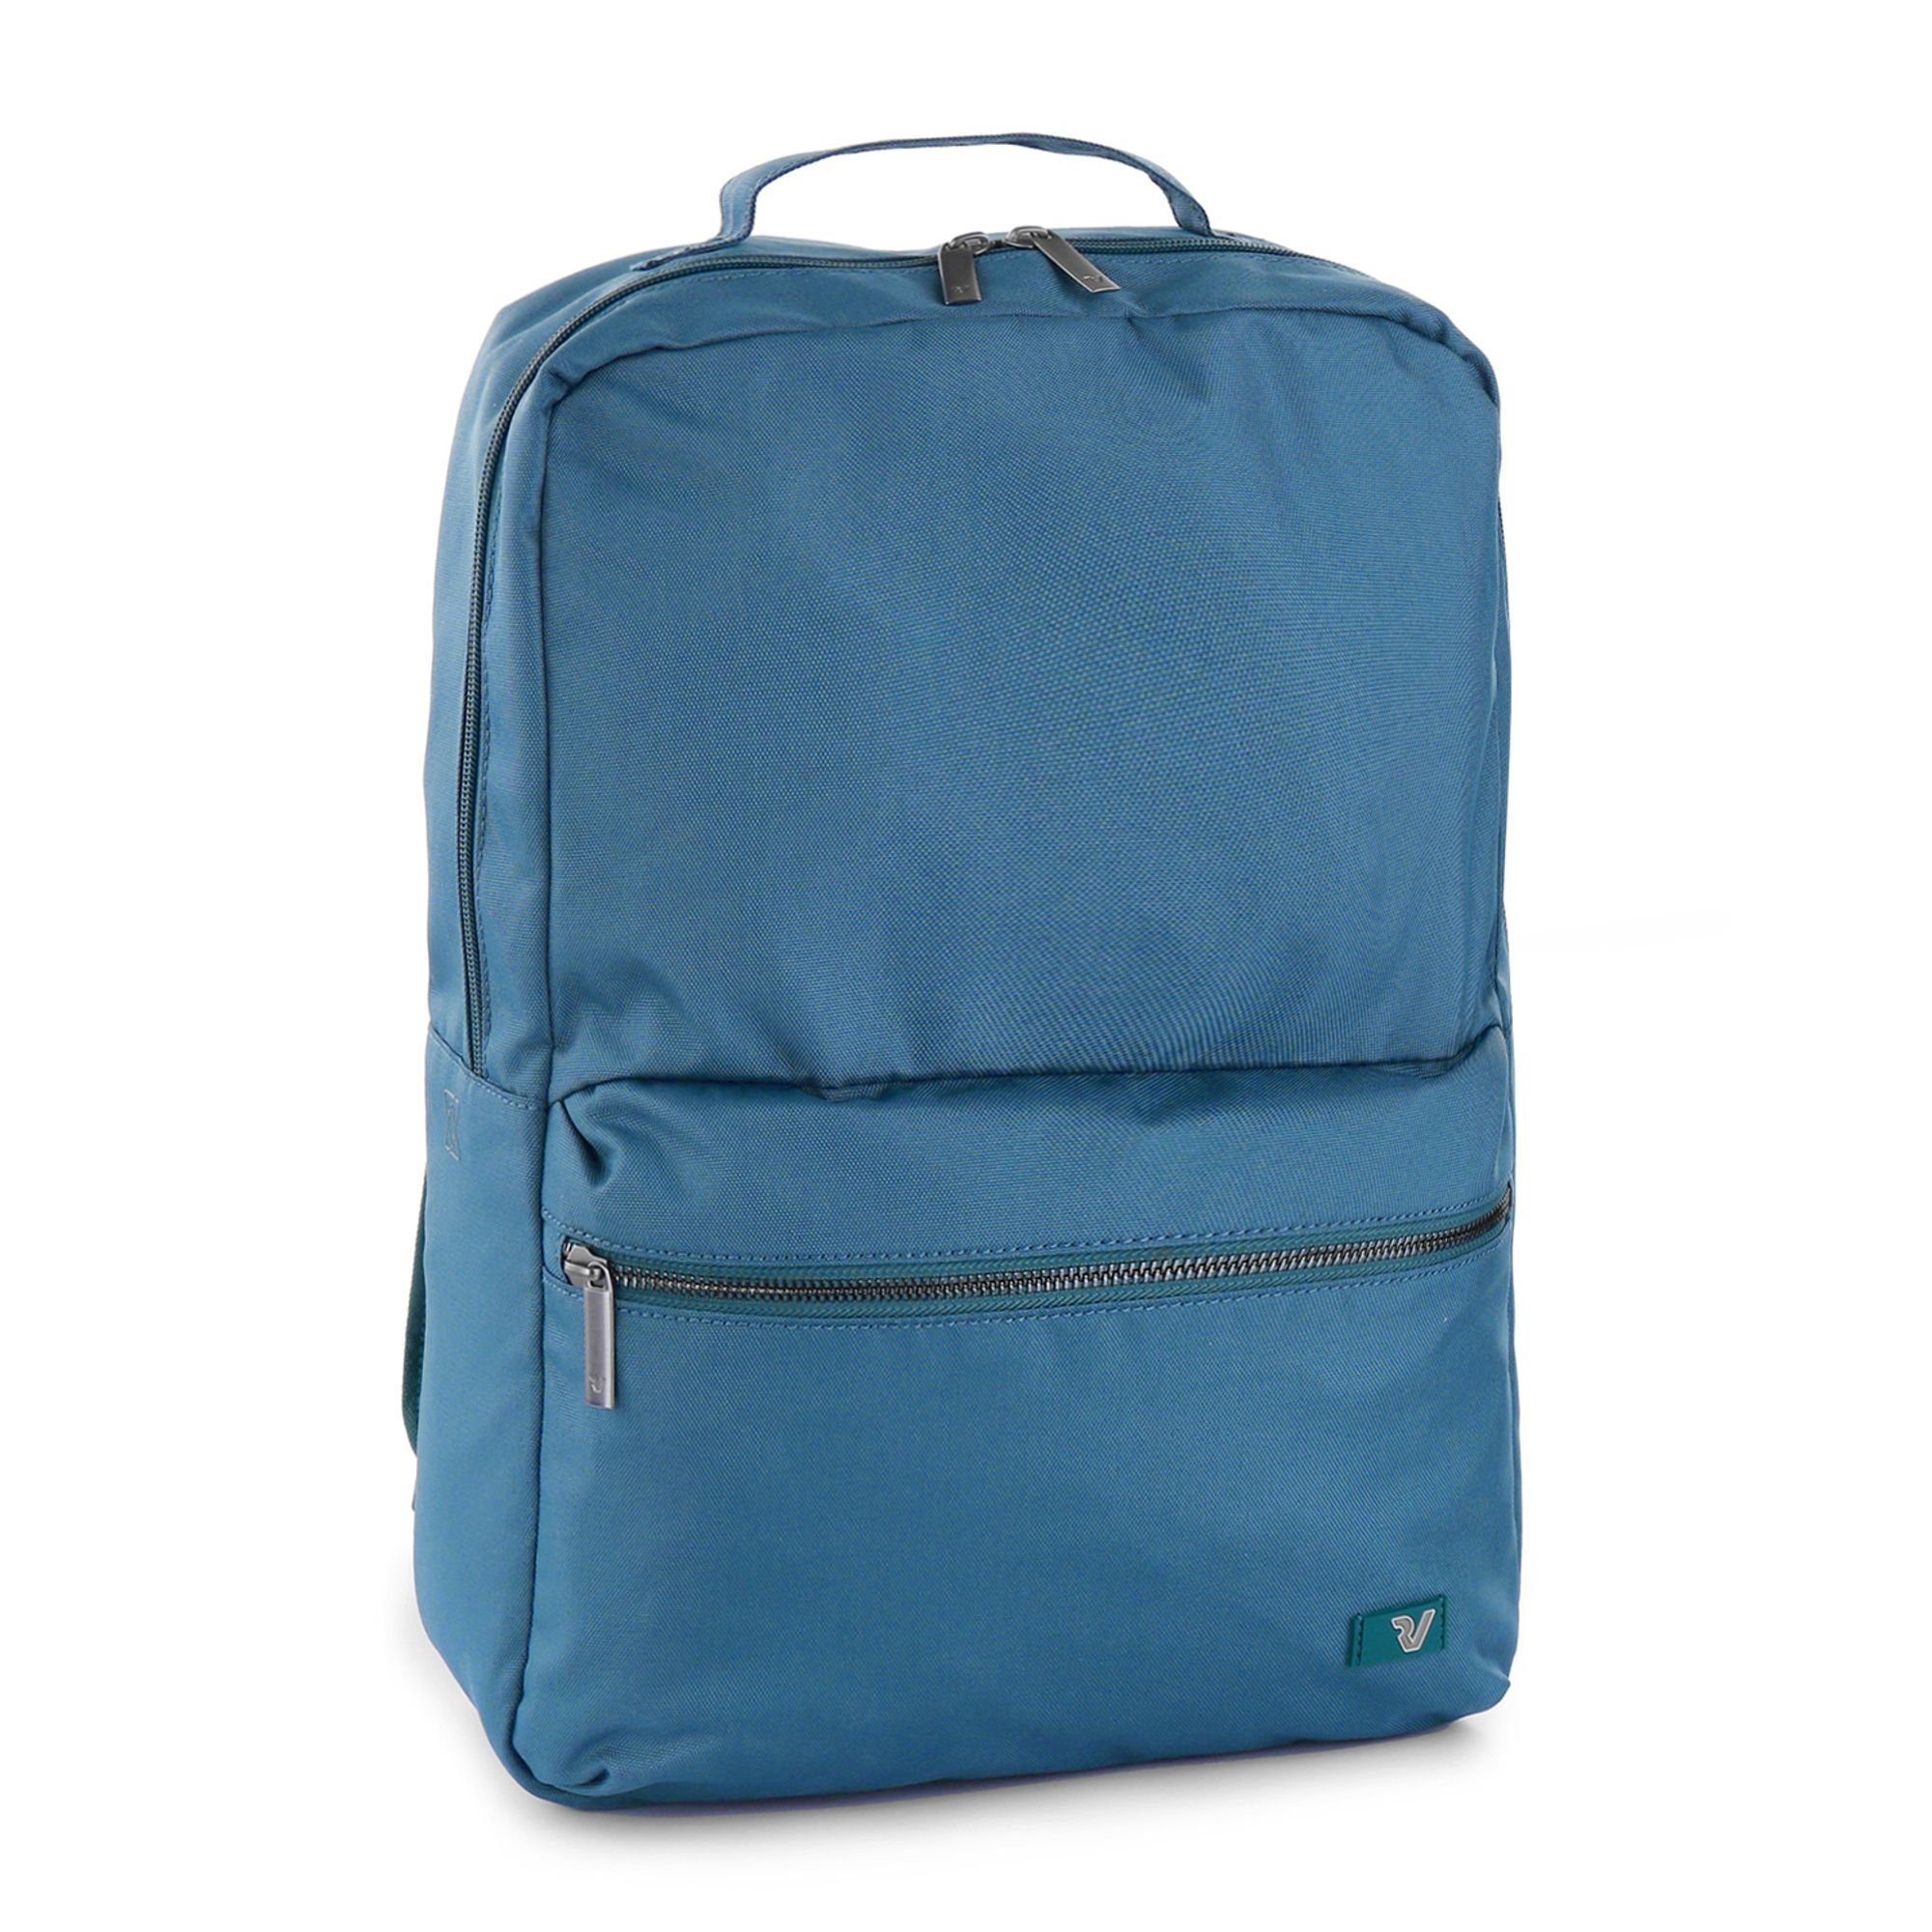 Brooklyn Daypack Revive, RONCATO Polyester